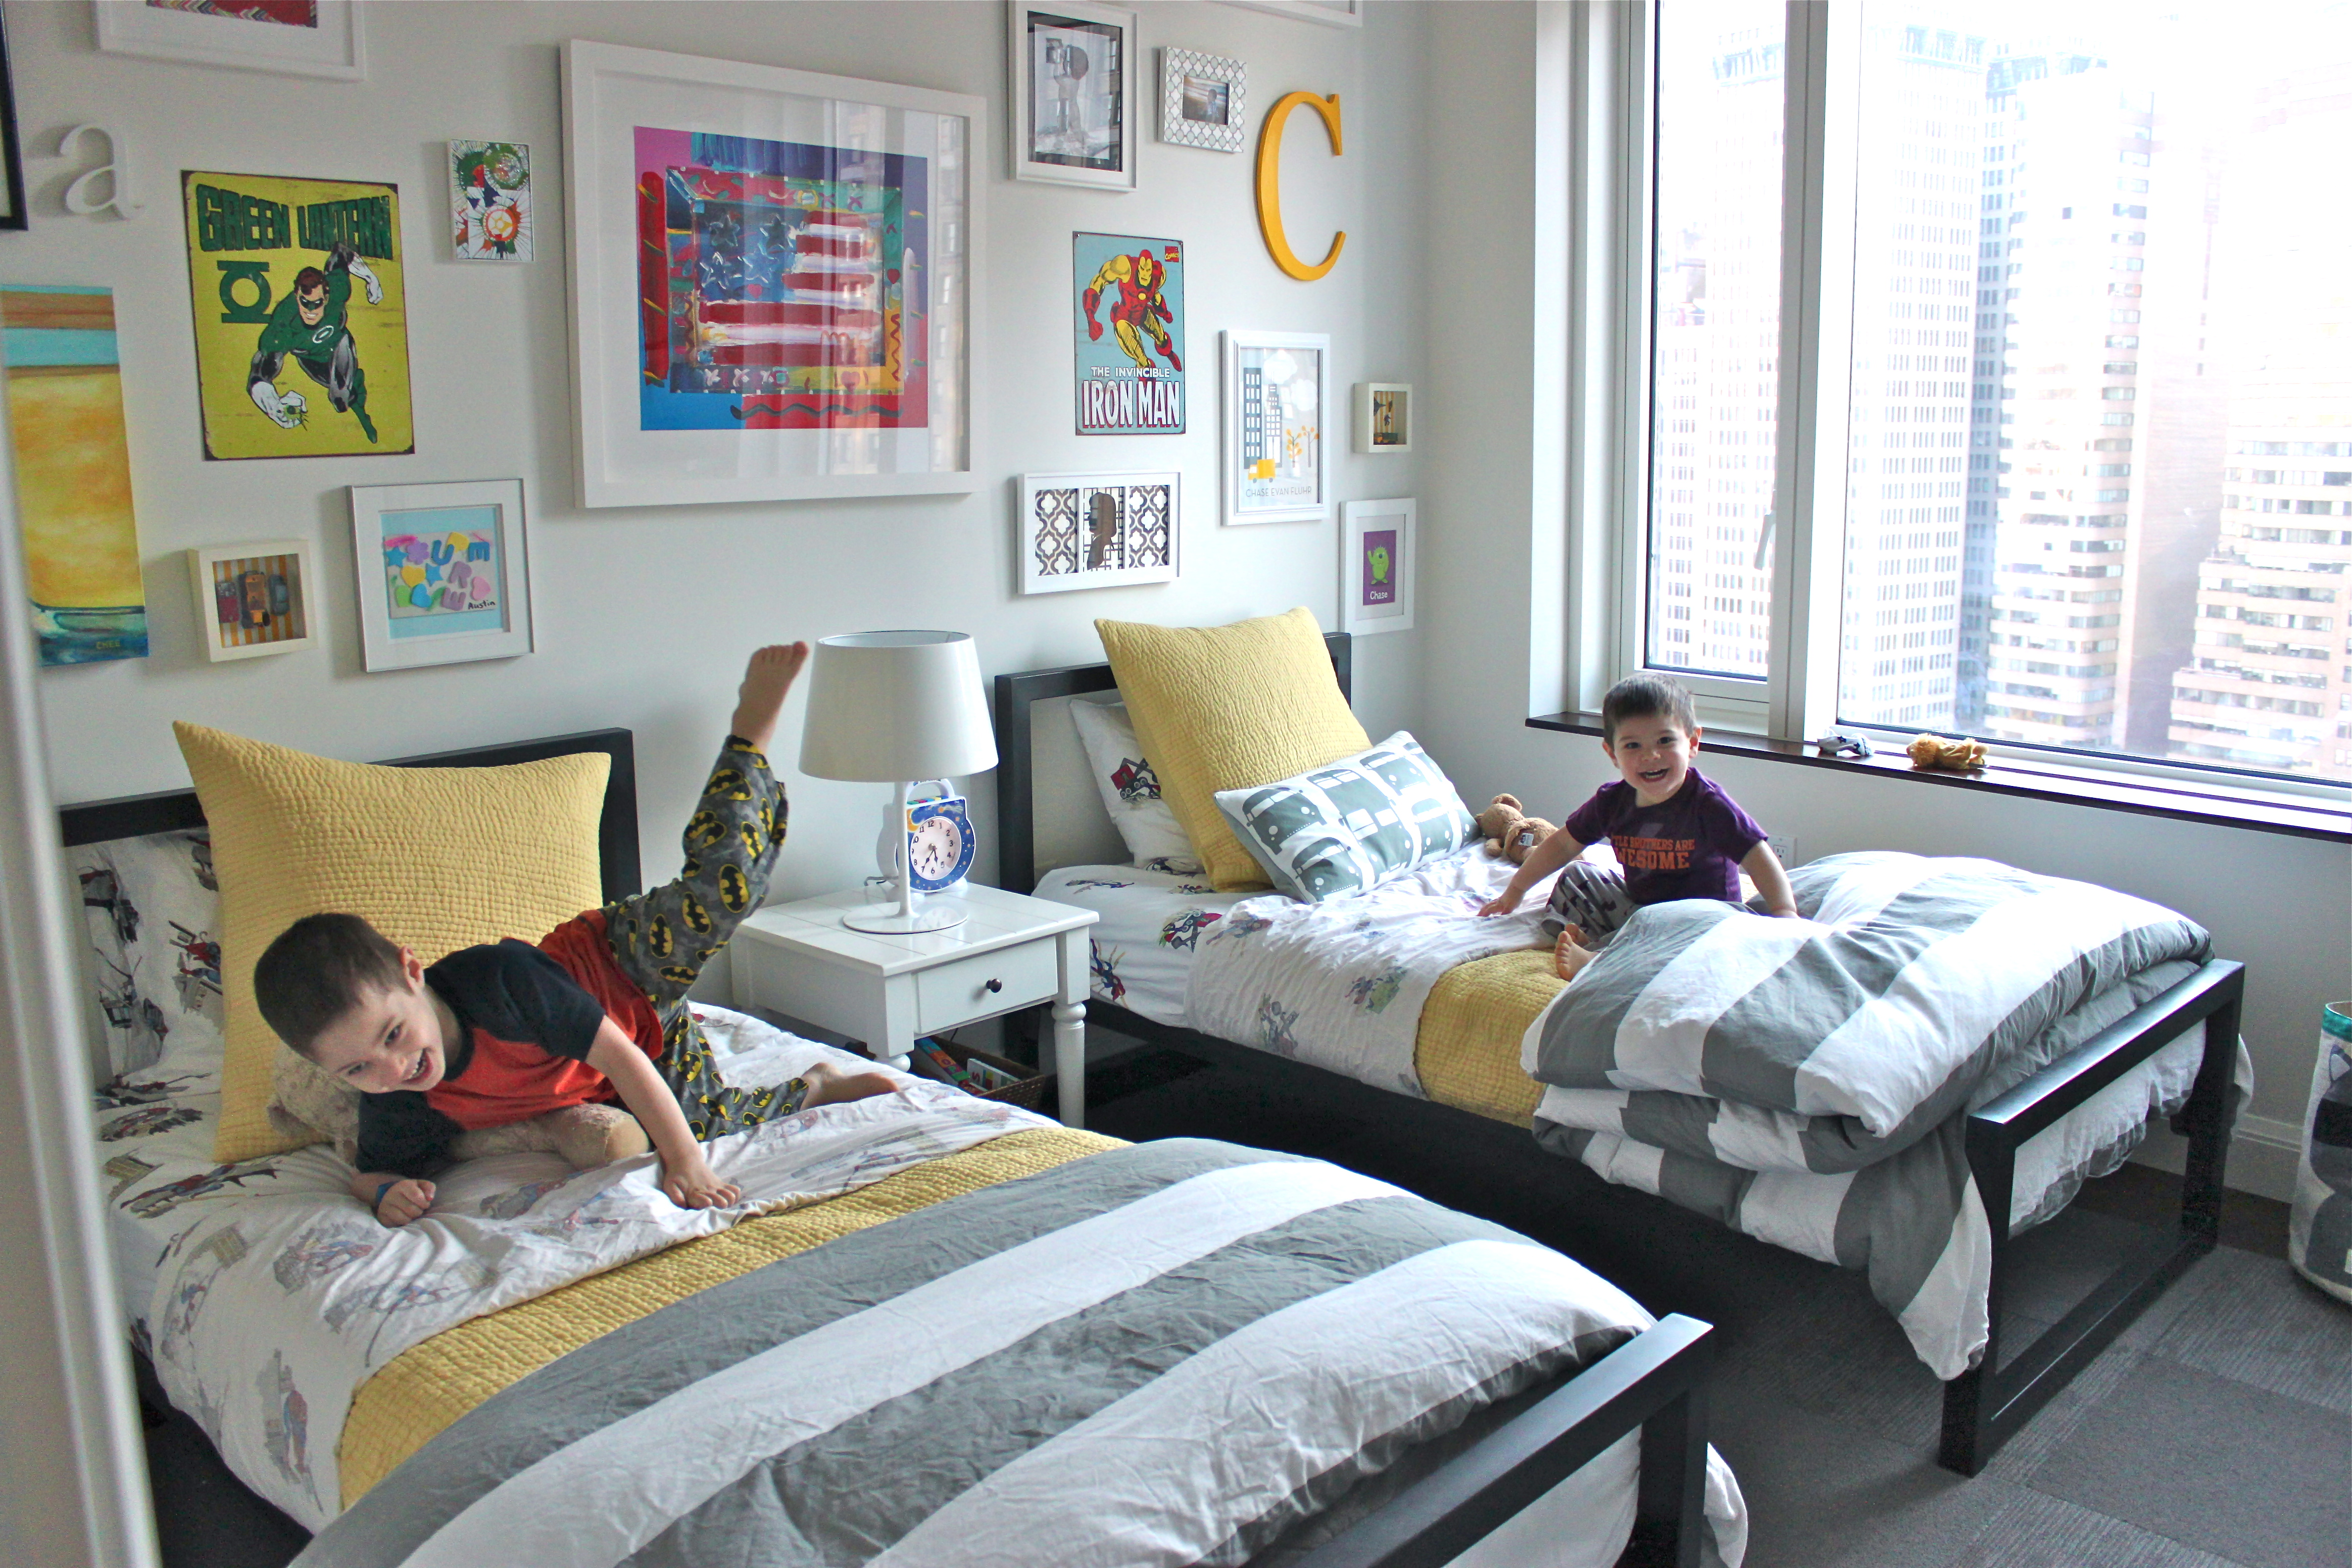 New Boys Shared Bedroom Ideas for Small Space